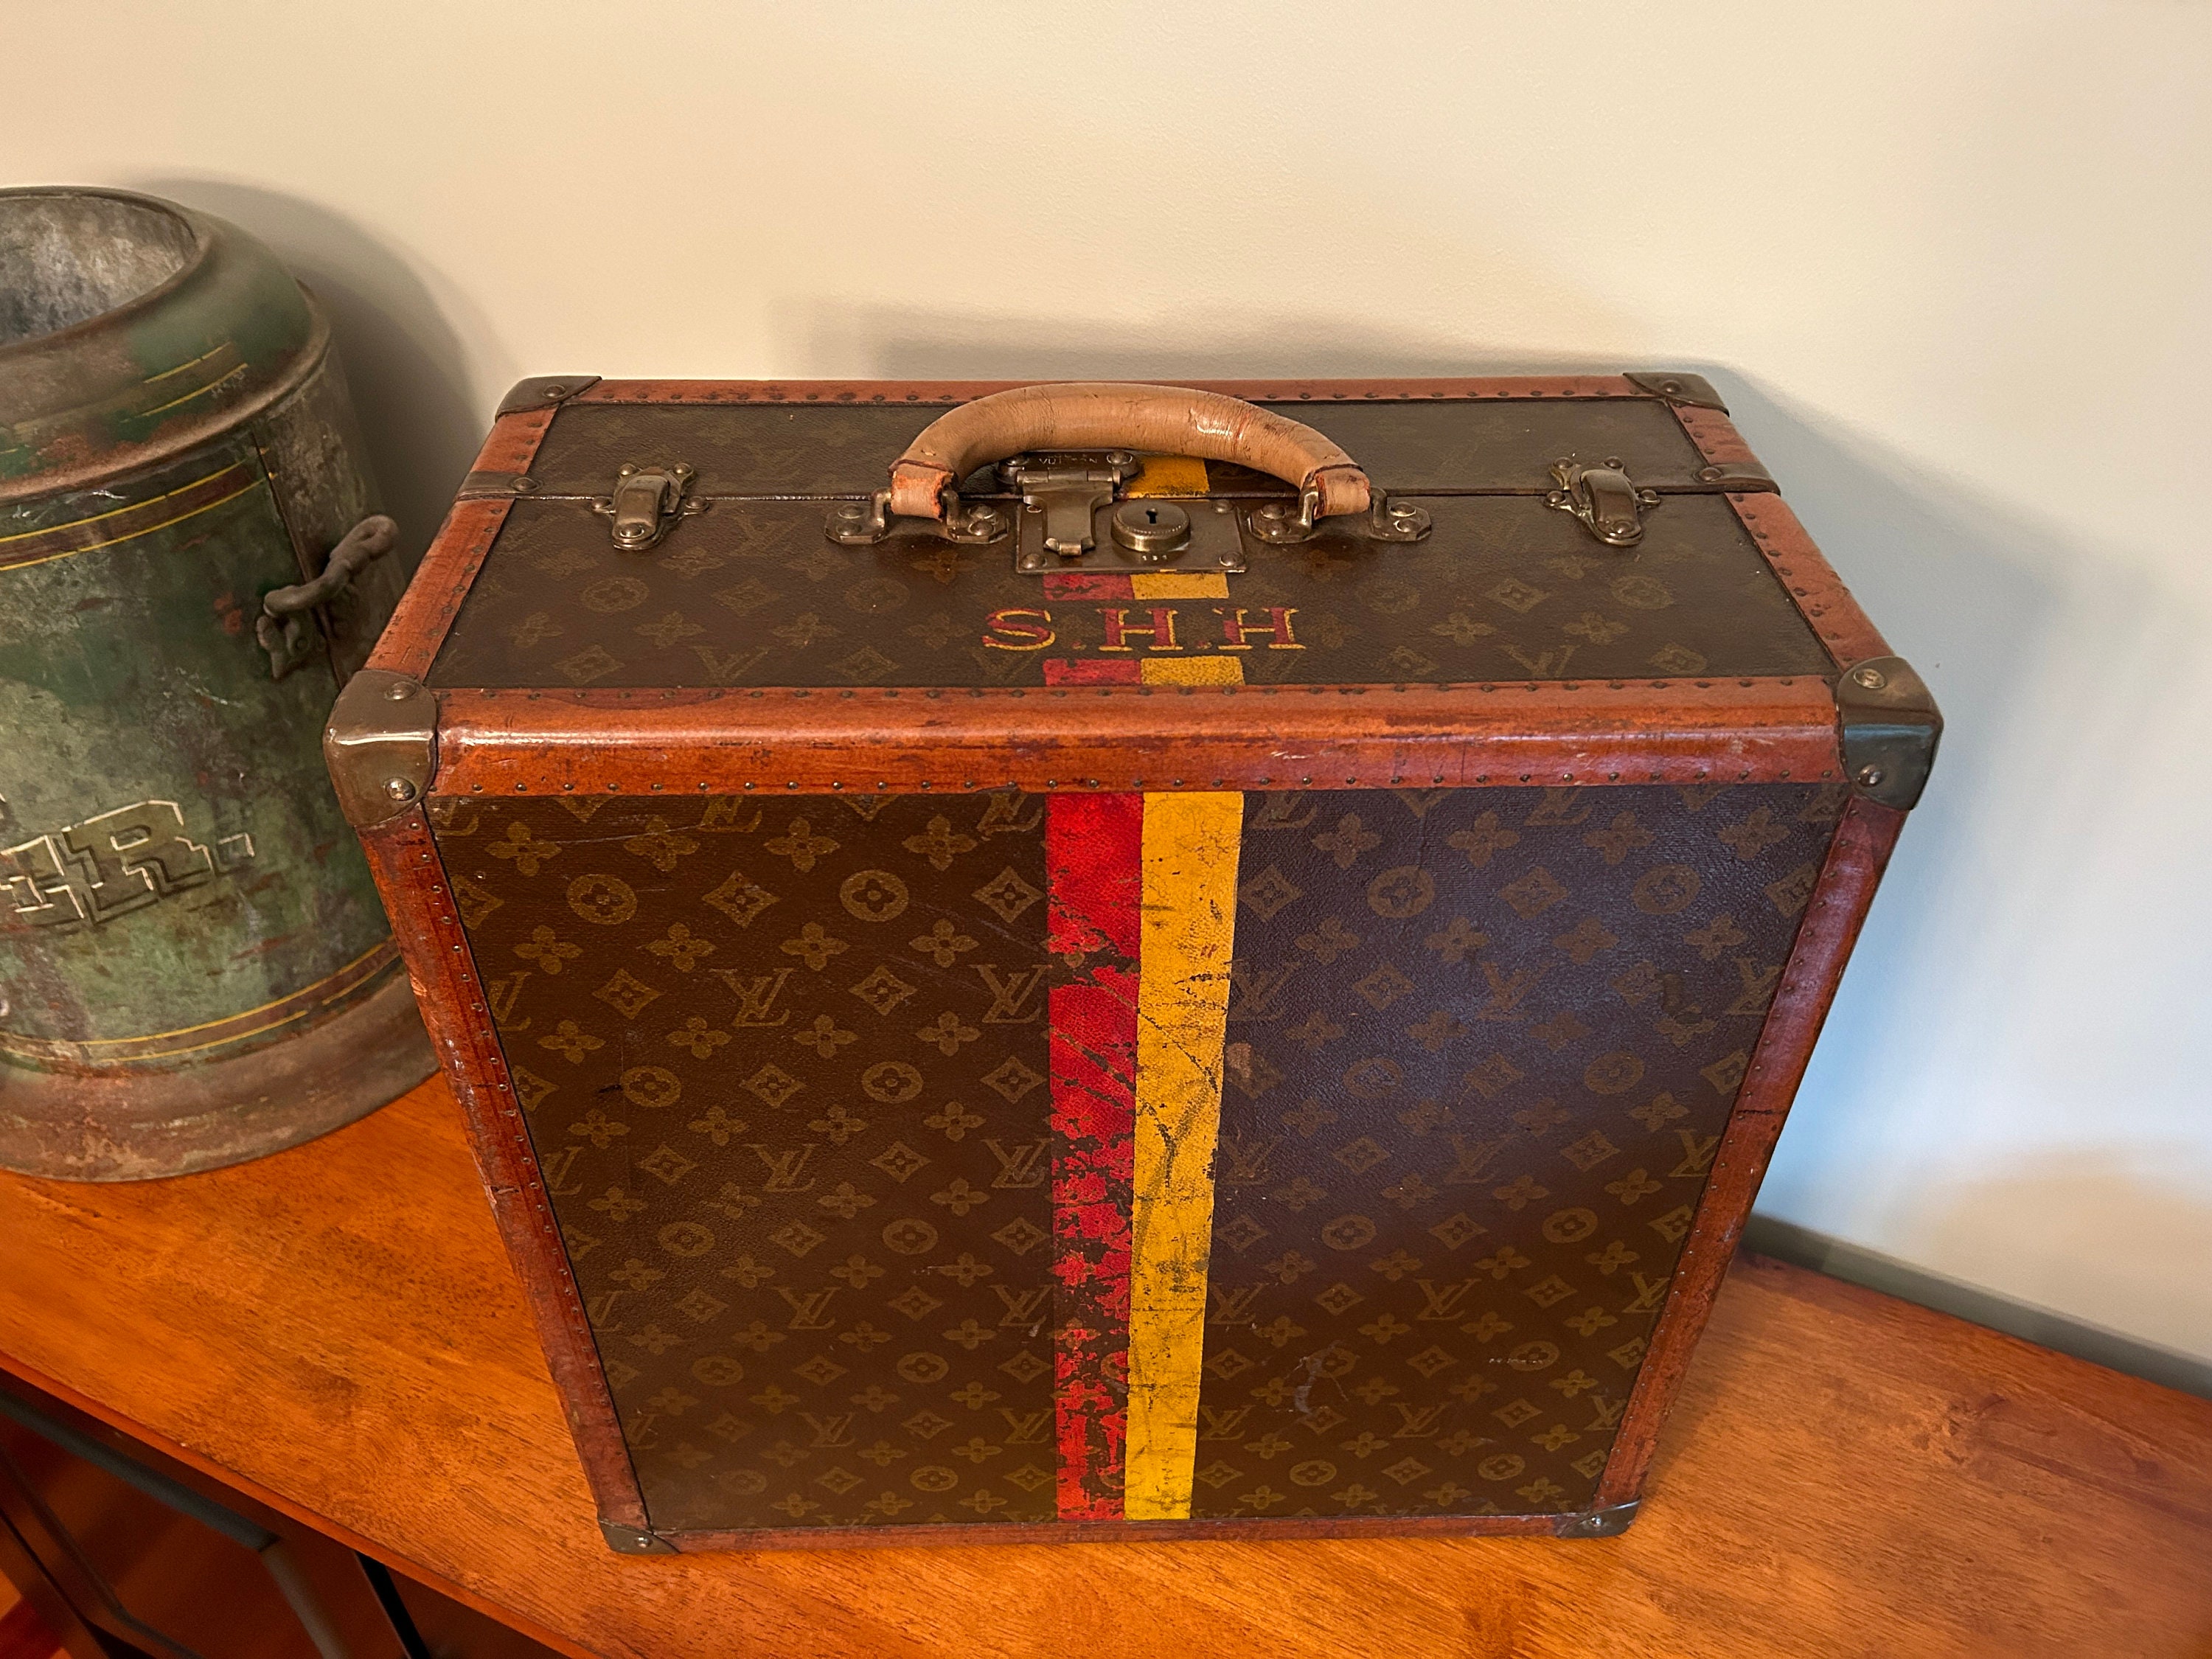 LOUIS VUITTON Novelty gift Trunk Jewelry box case VIP MINI MALLE COURRIER  1888